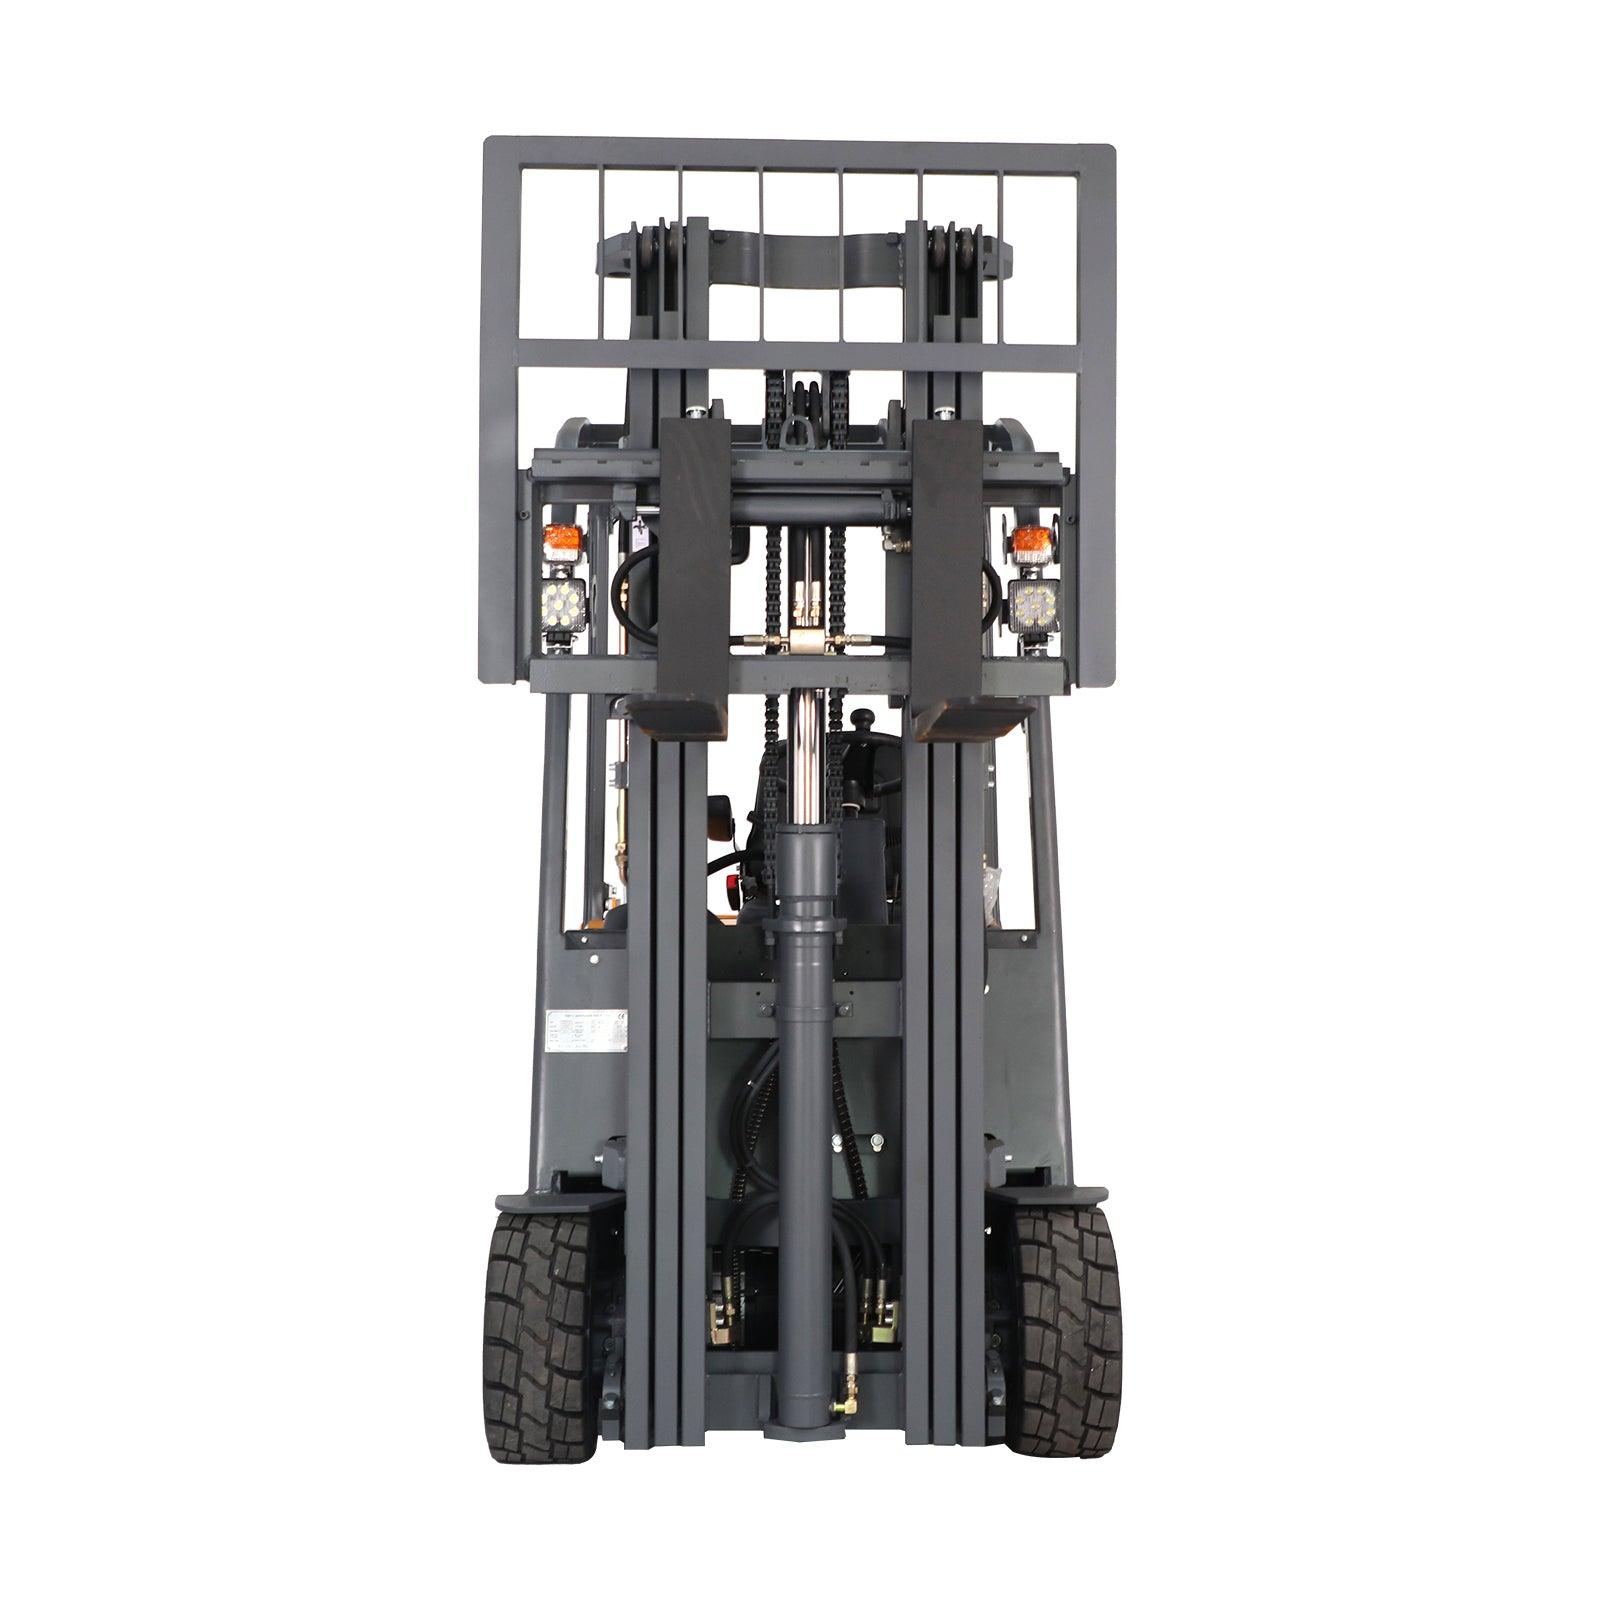 3 Wheels Lithium-ion Battery Forklift 4400lbs Cap. 220 Lifting A-4002